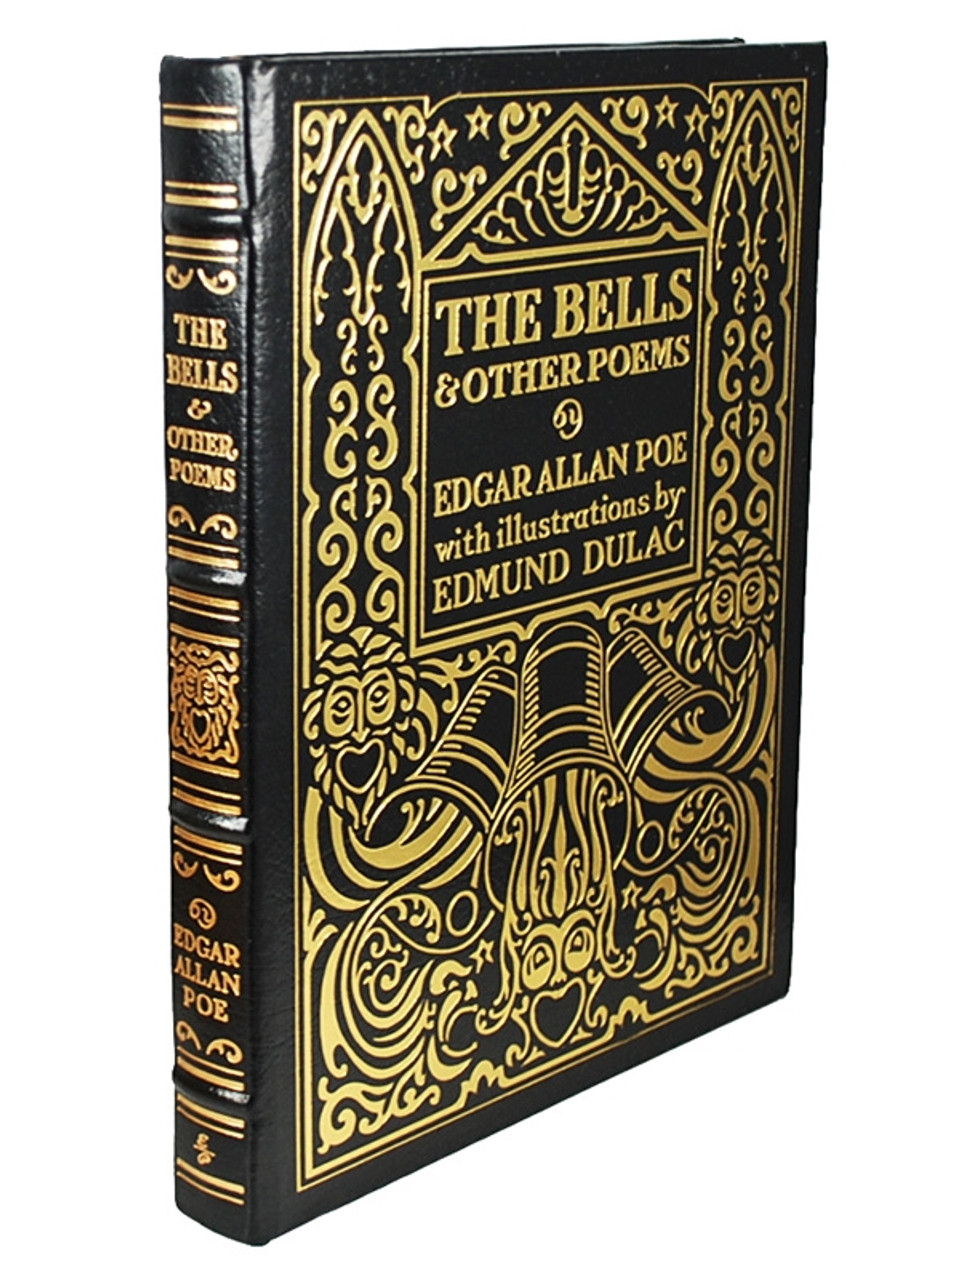 Easton Press "The Bells and other Poems" Edgar Allan Poe, Leather Bound Collector's Edition [Very Fine]